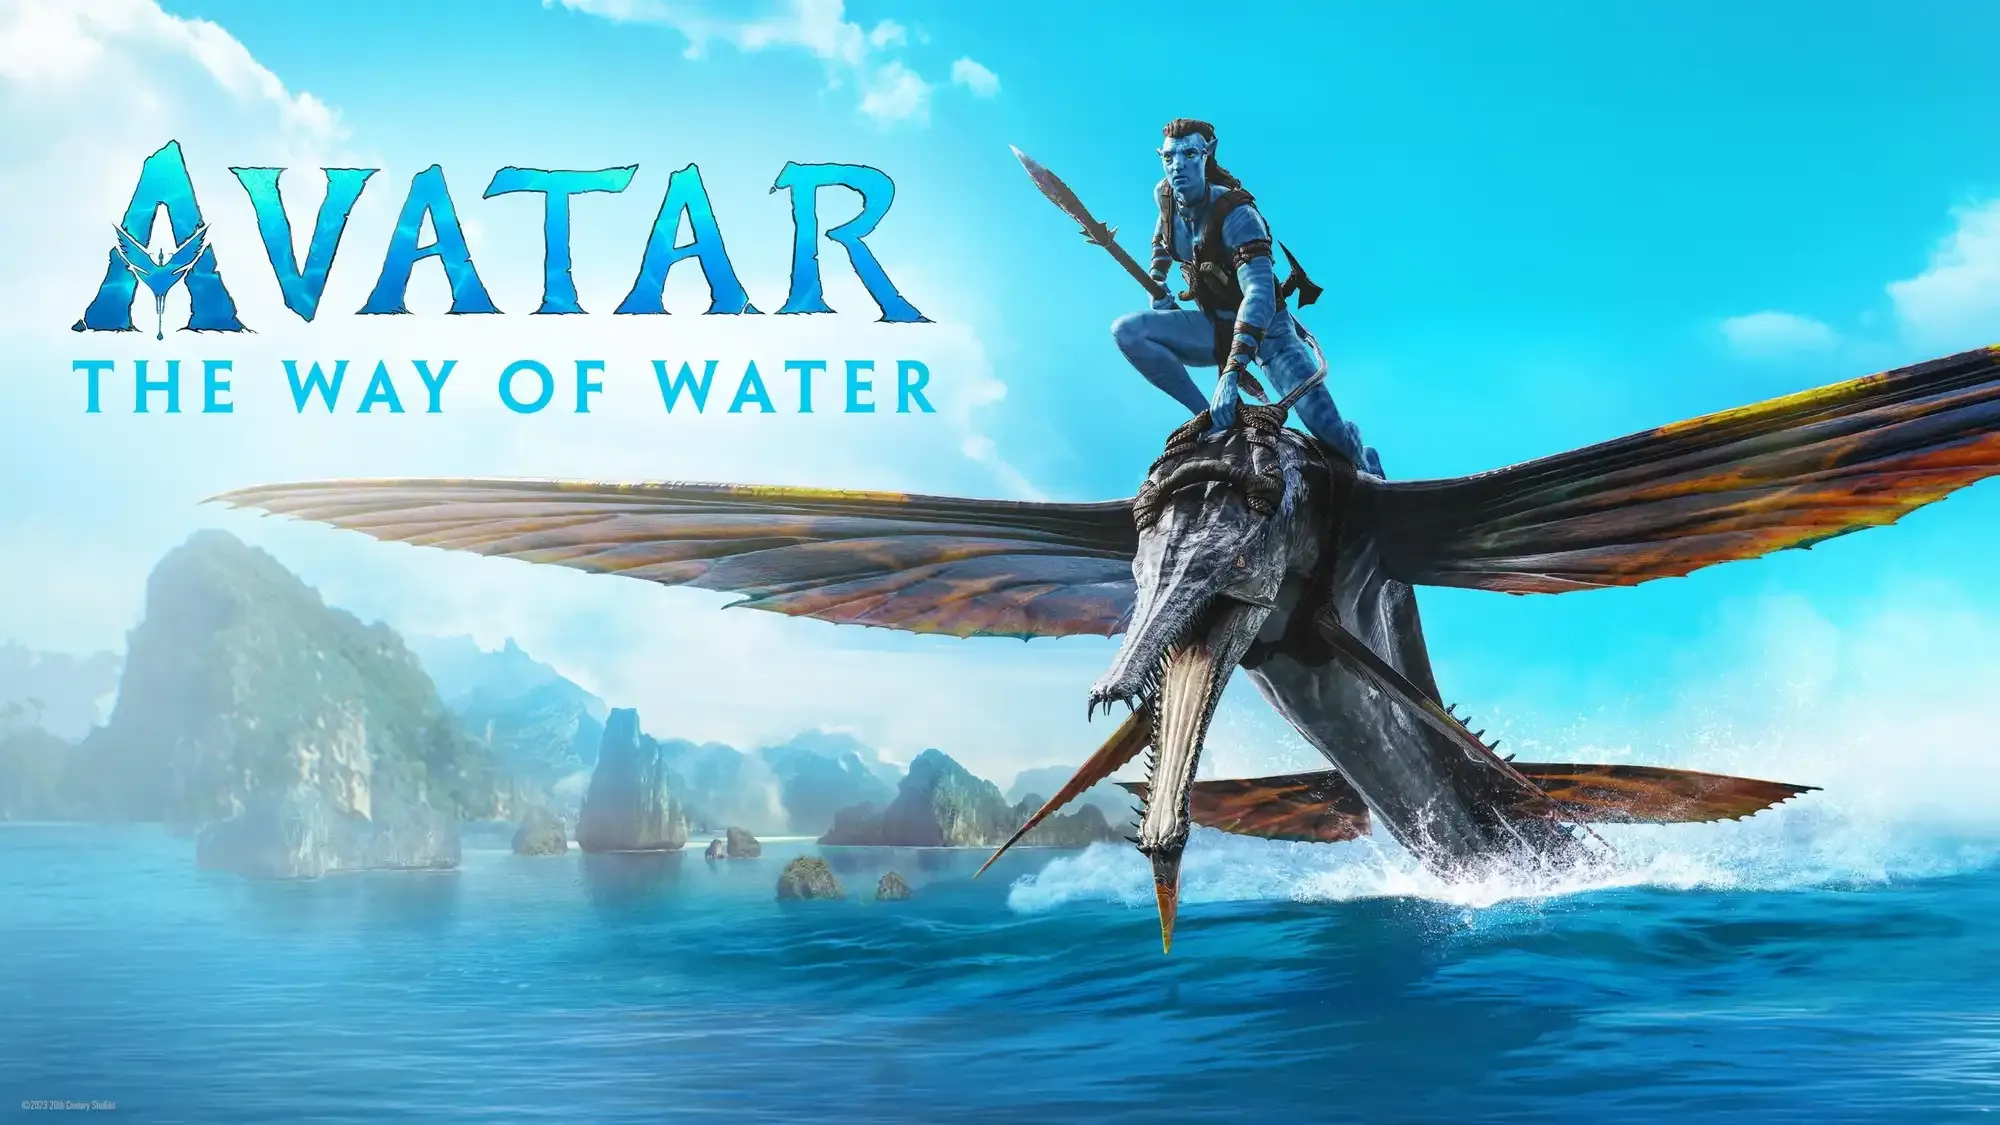 Avatar: The Way of Water movie review